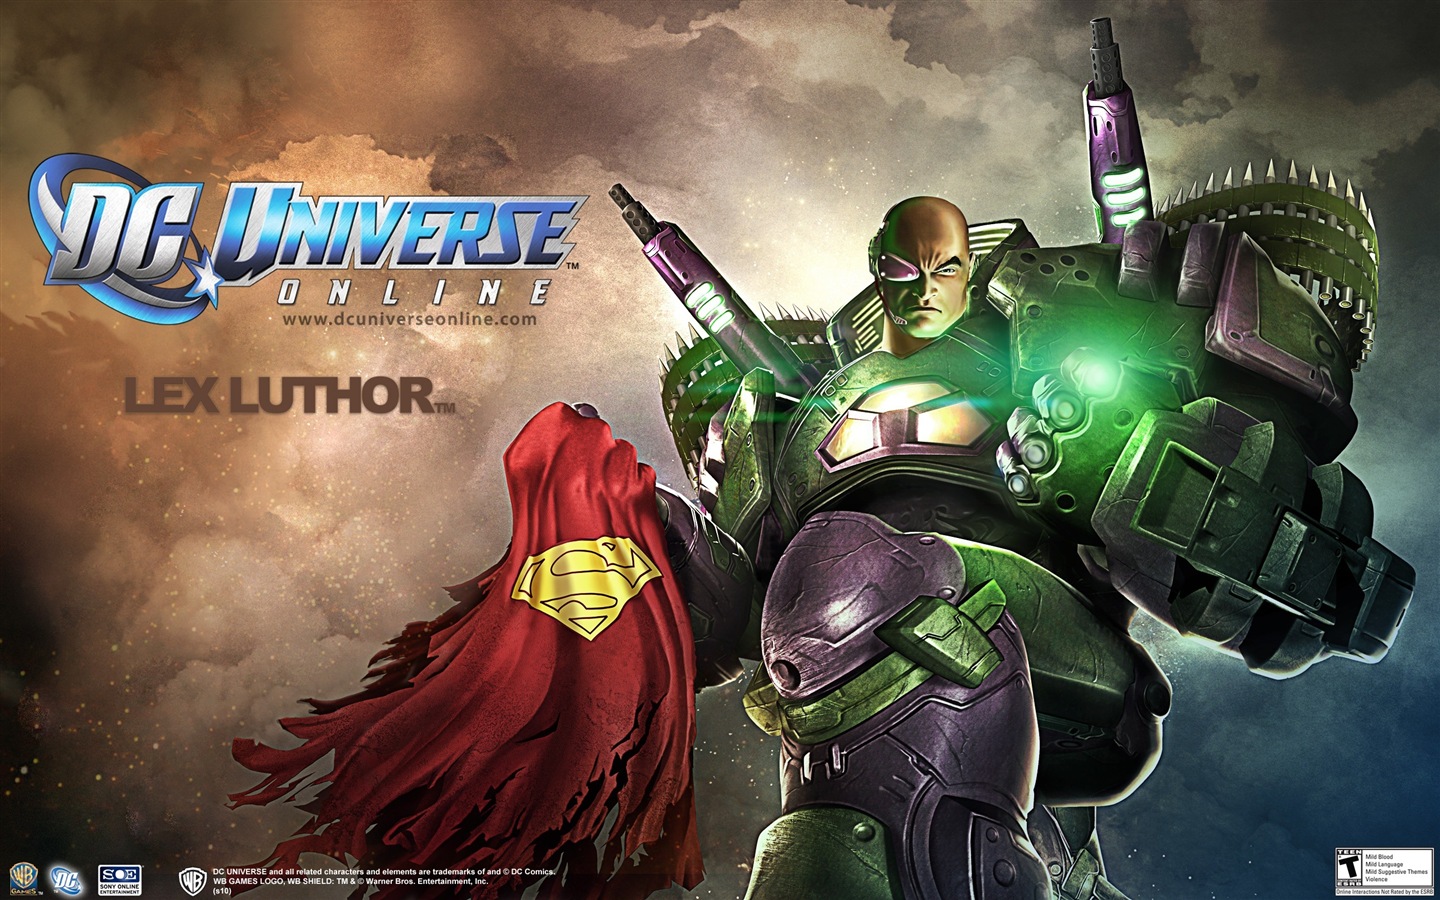 DC Universe Online HD game wallpapers #19 - 1440x900